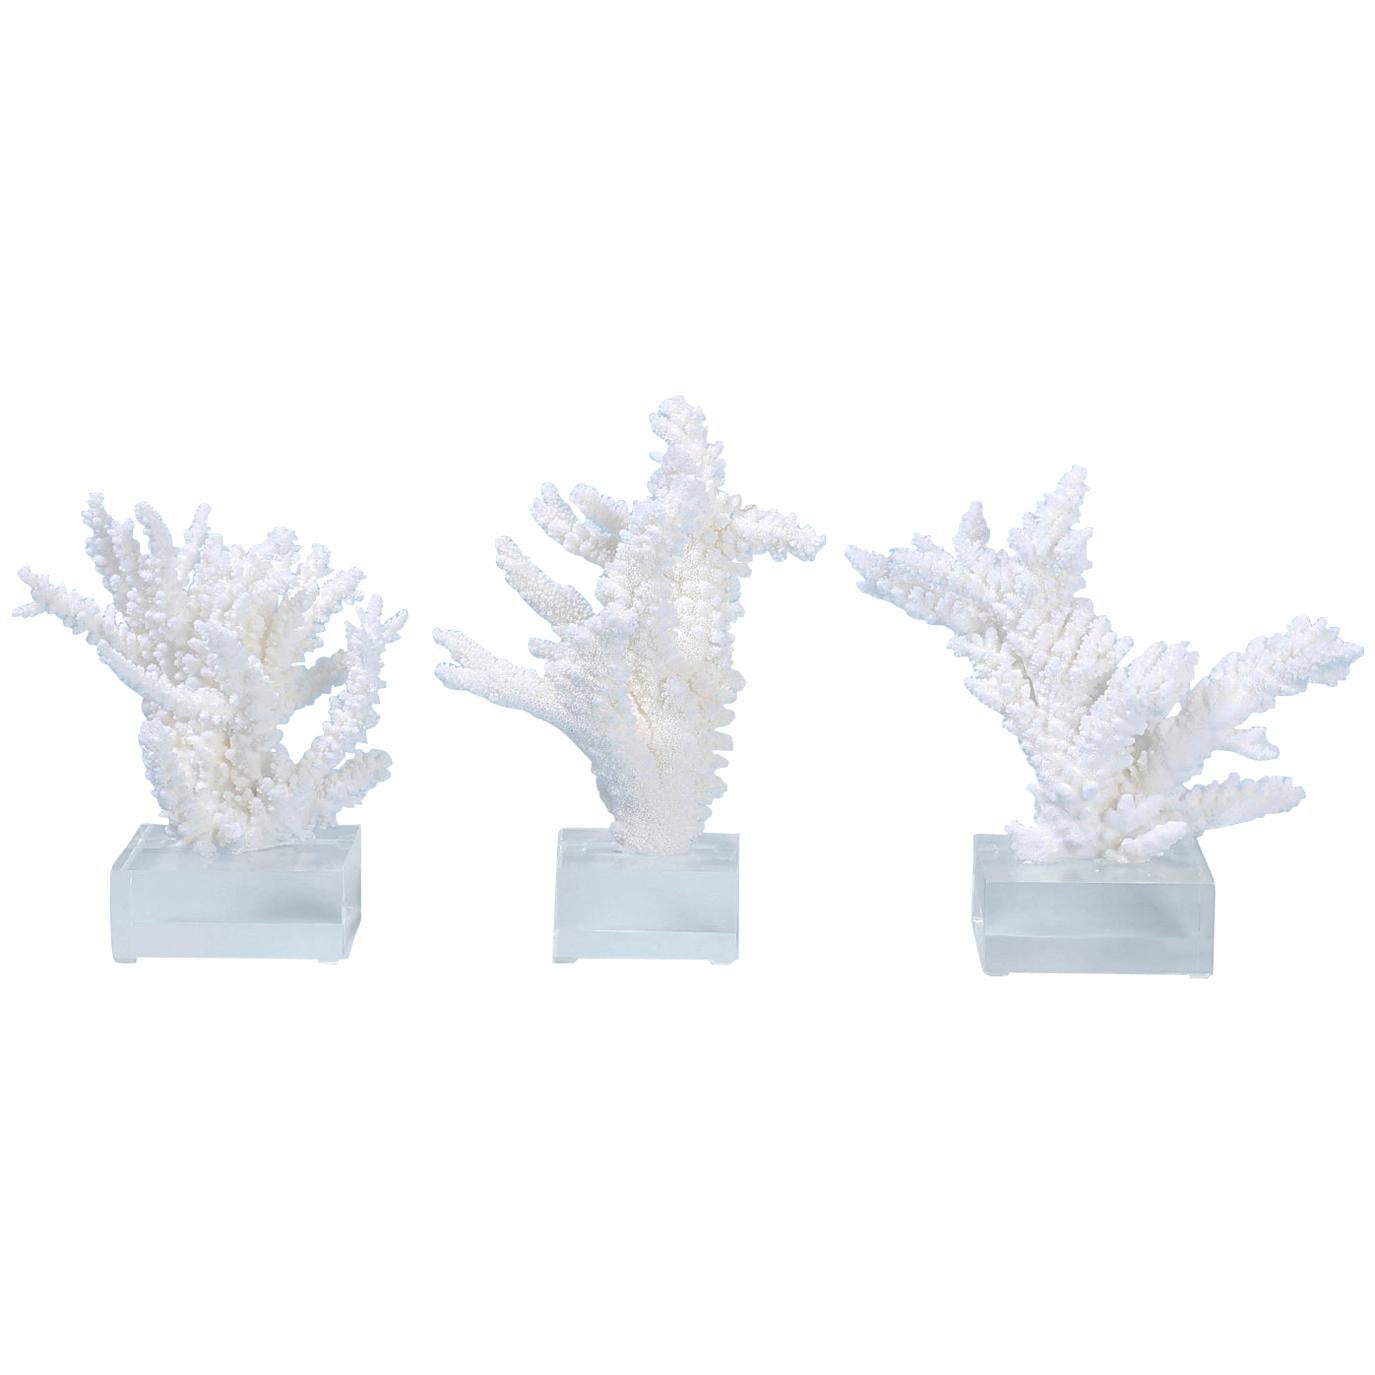 Three Branch Corals on Lucite, Priced Individually